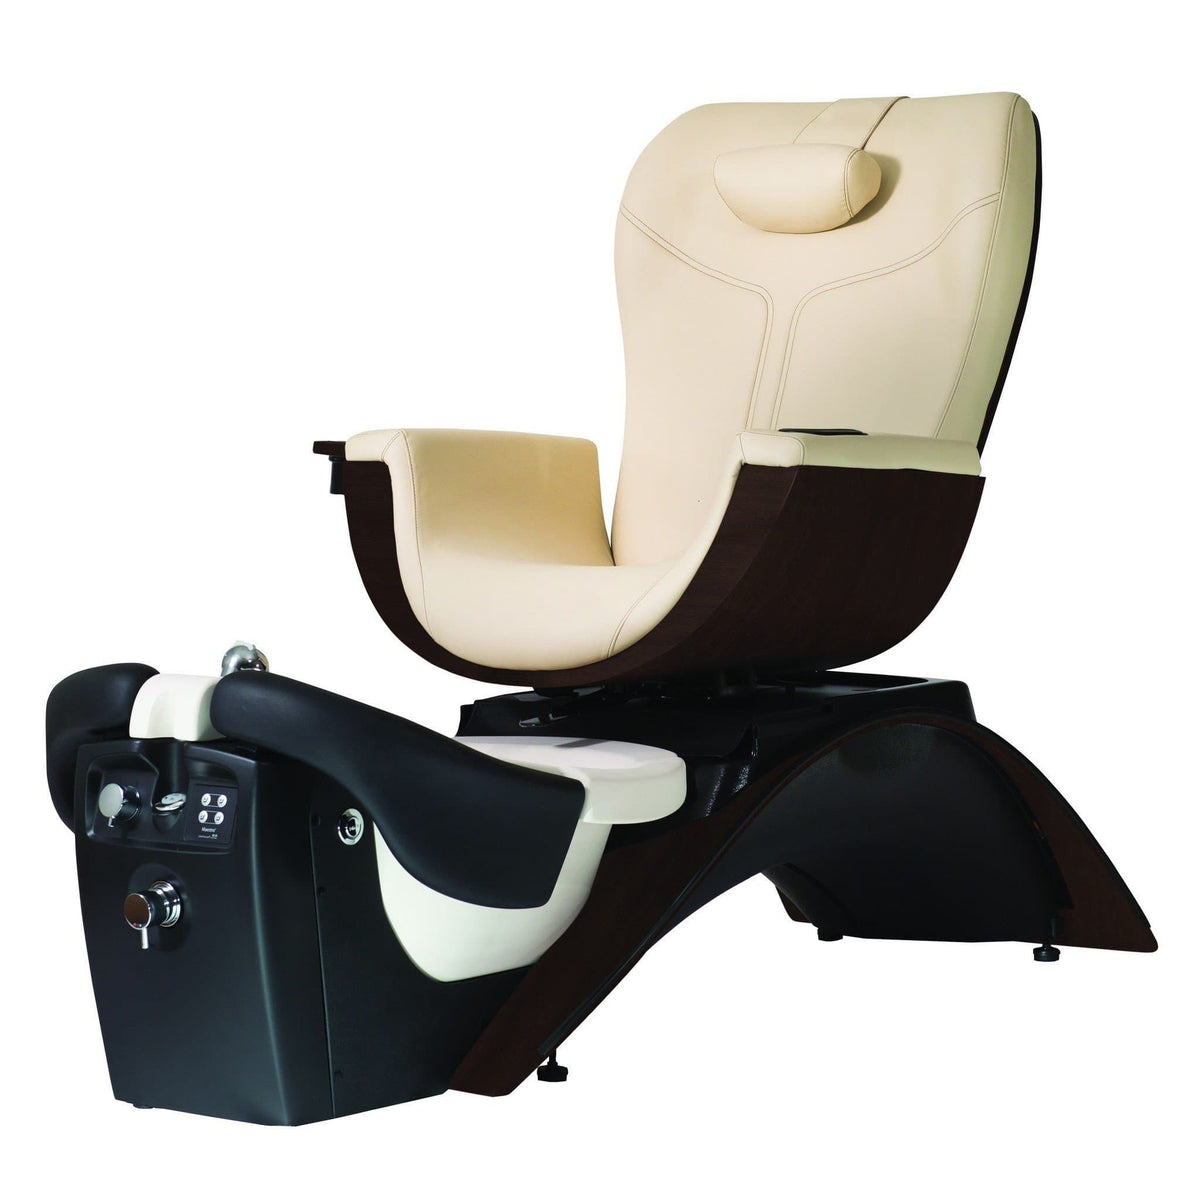 Continuum Continuum Maestro Pedicure Spa Chair Pedicure &amp; Spa Chairs - ChairsThatGive